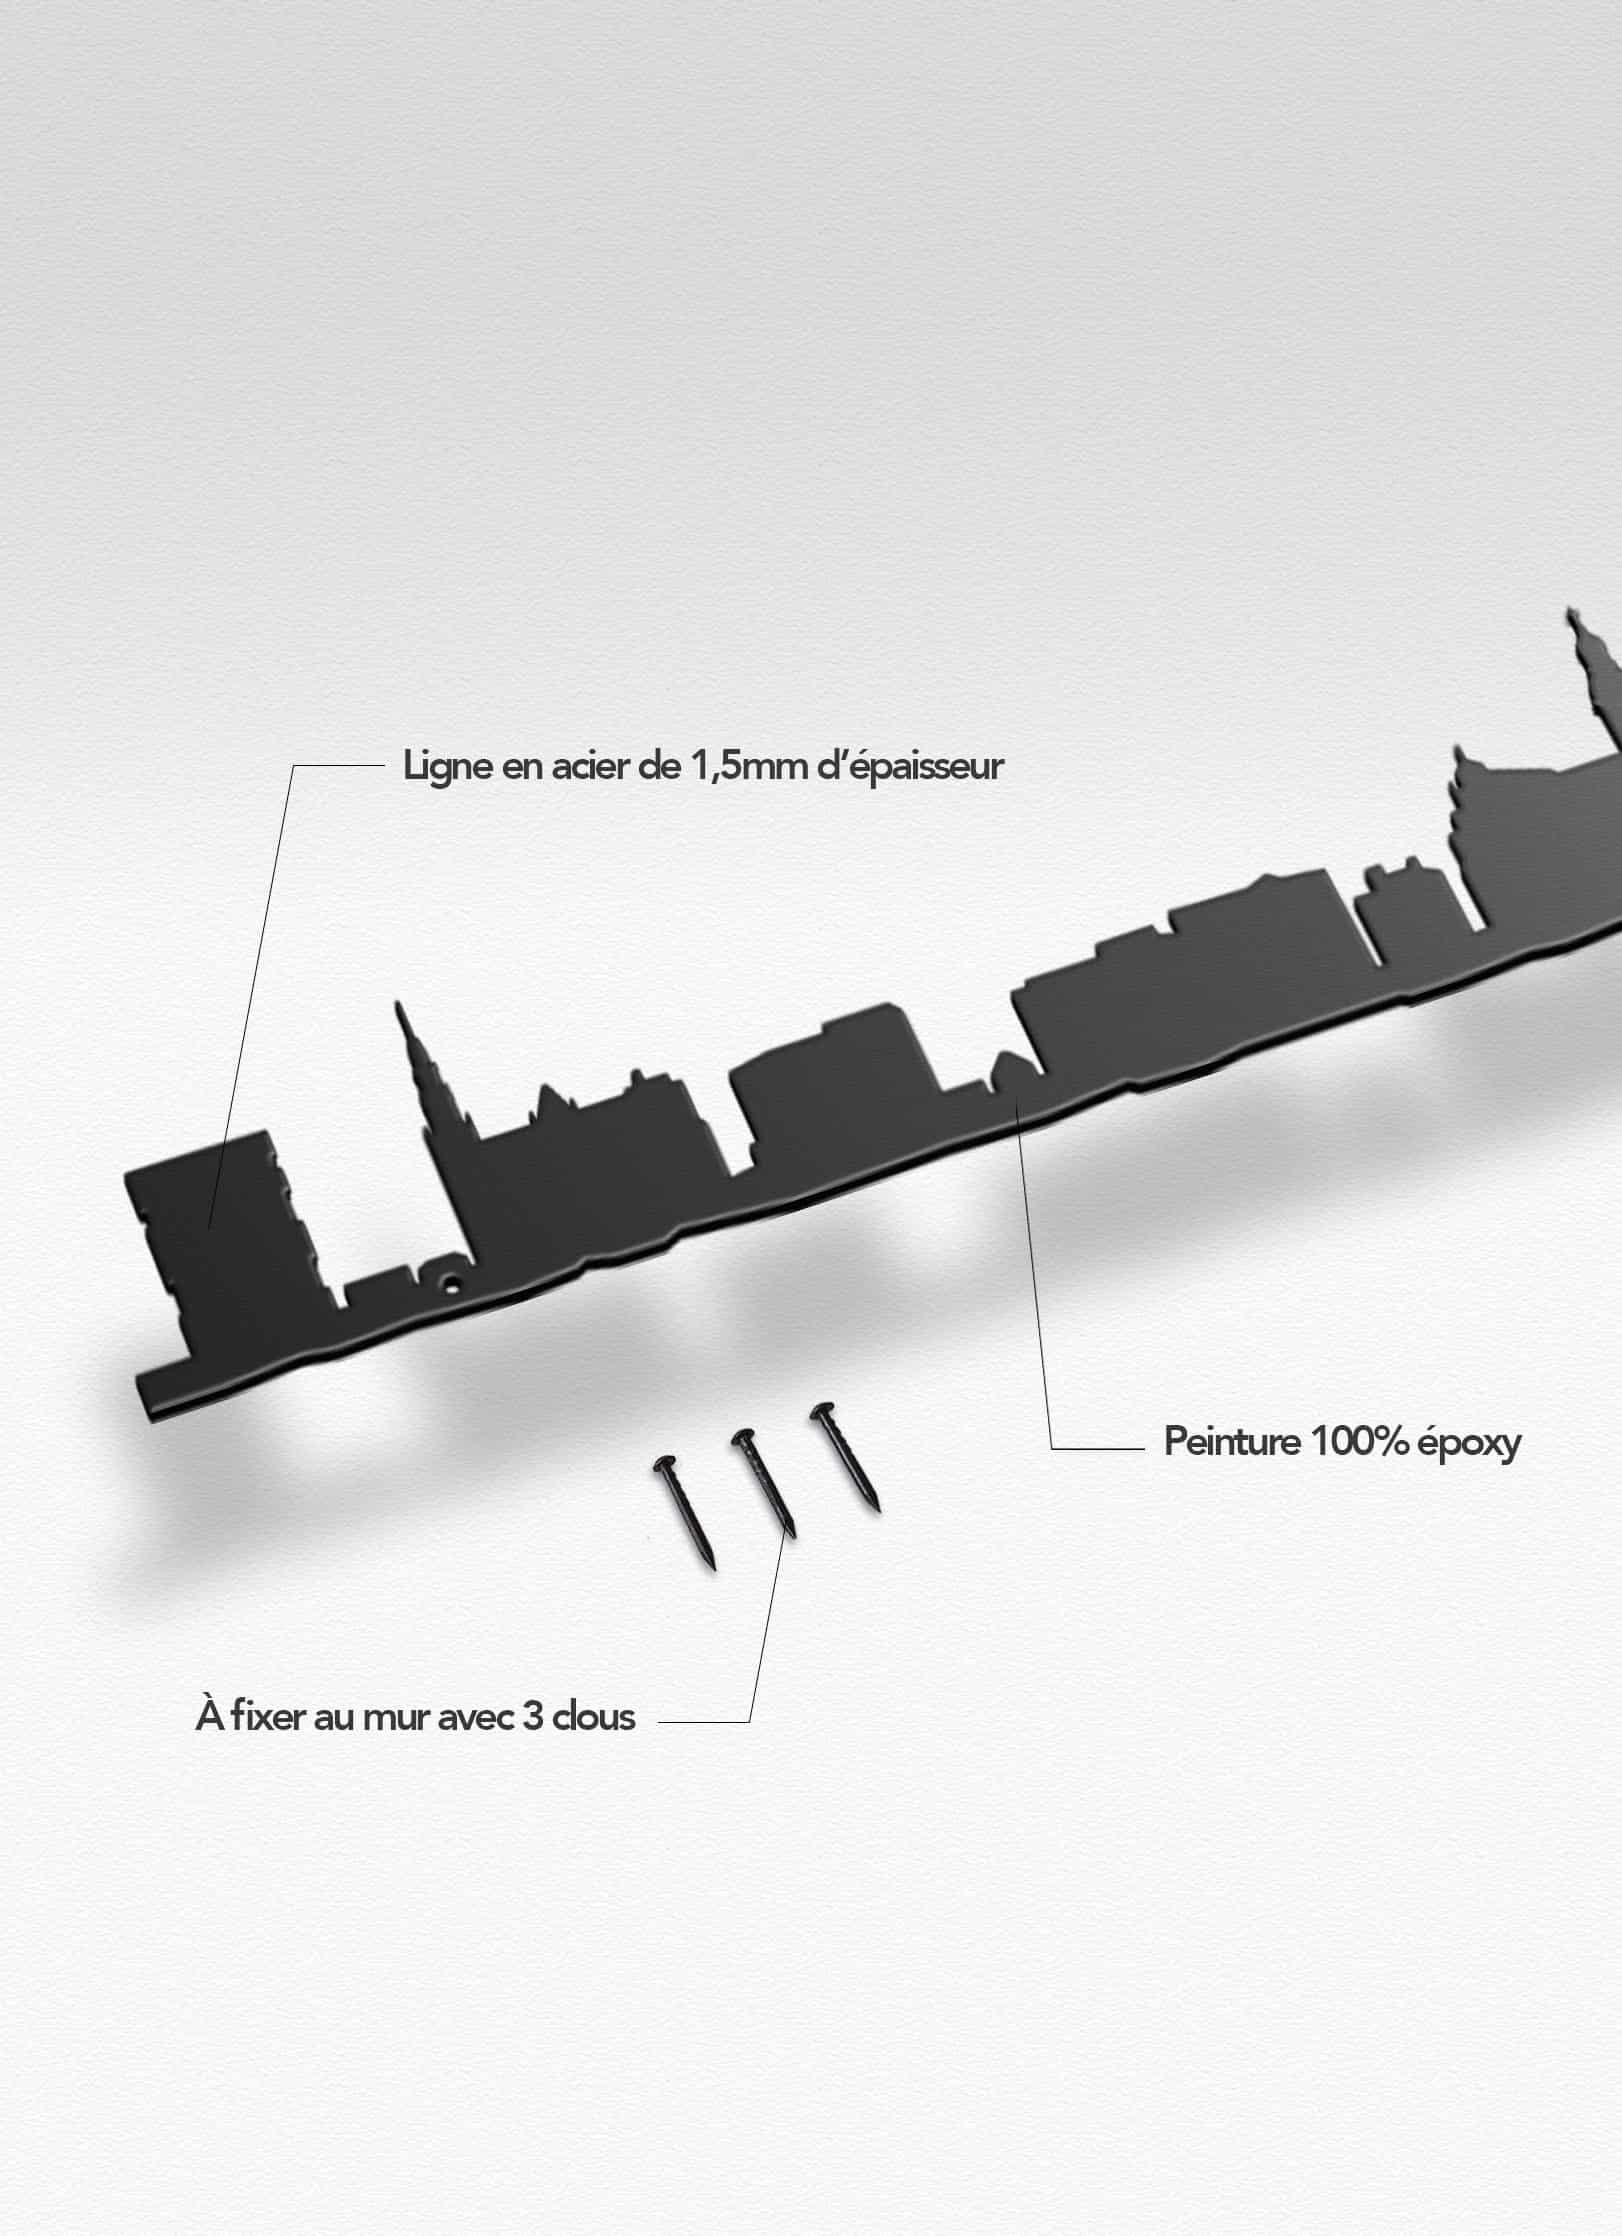 Presentation of the skyline of Anvers